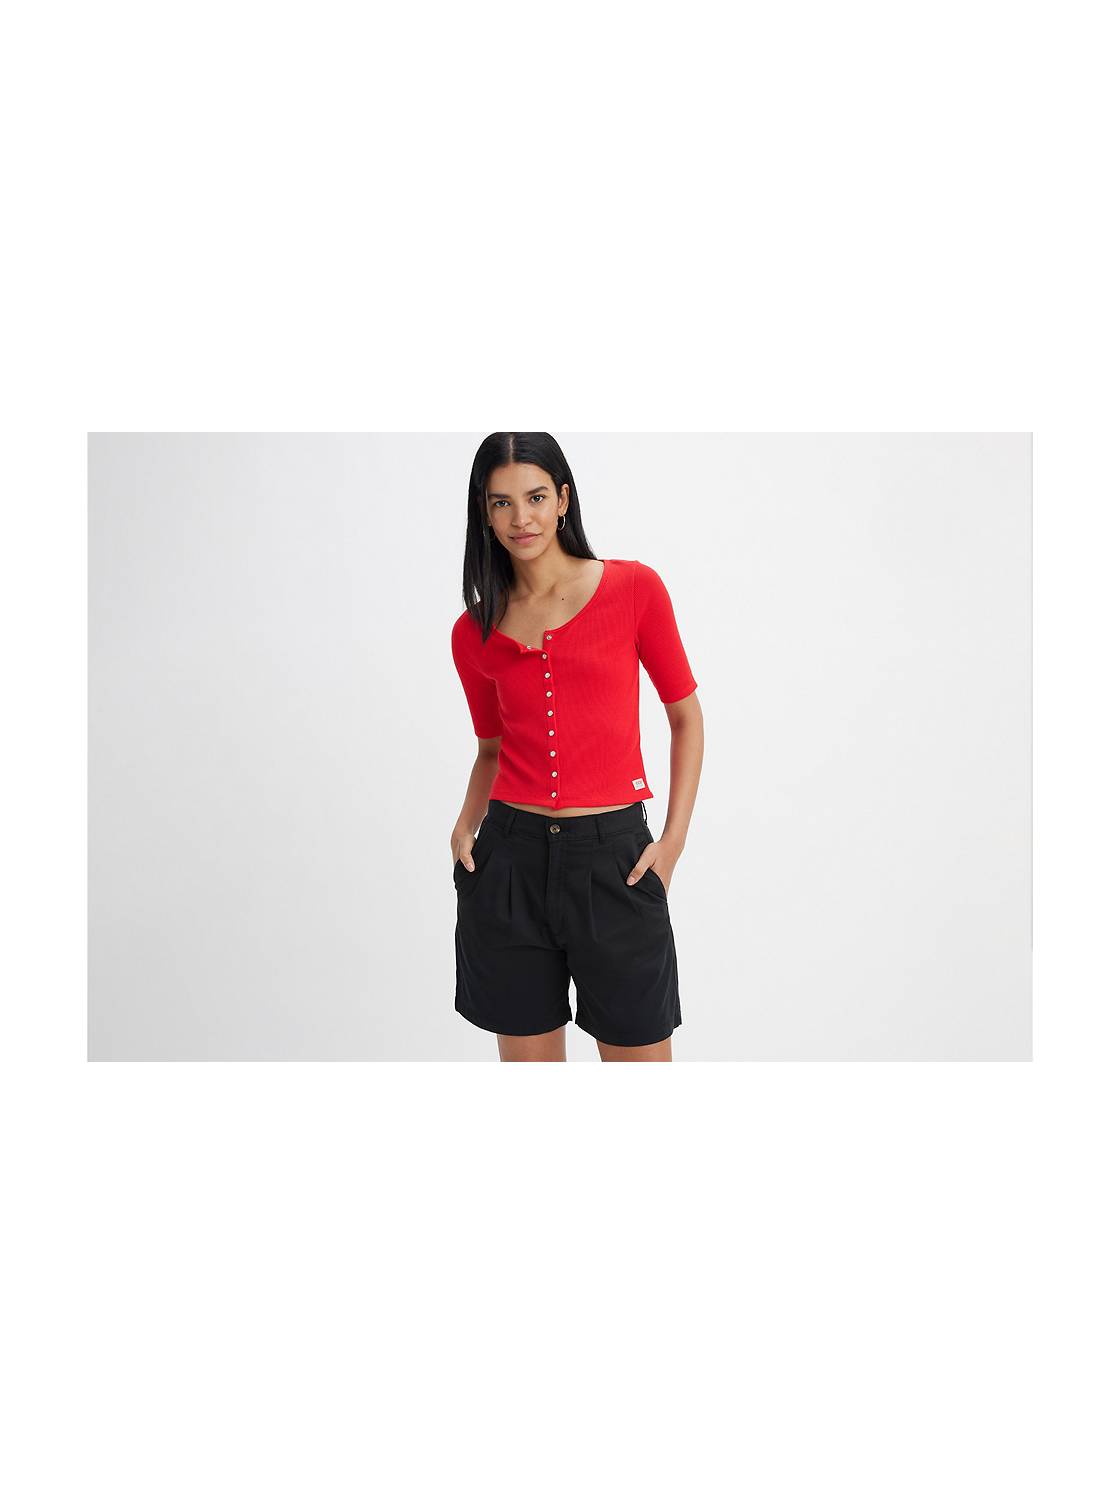 Women's Red Shirts, Blouses & Tops